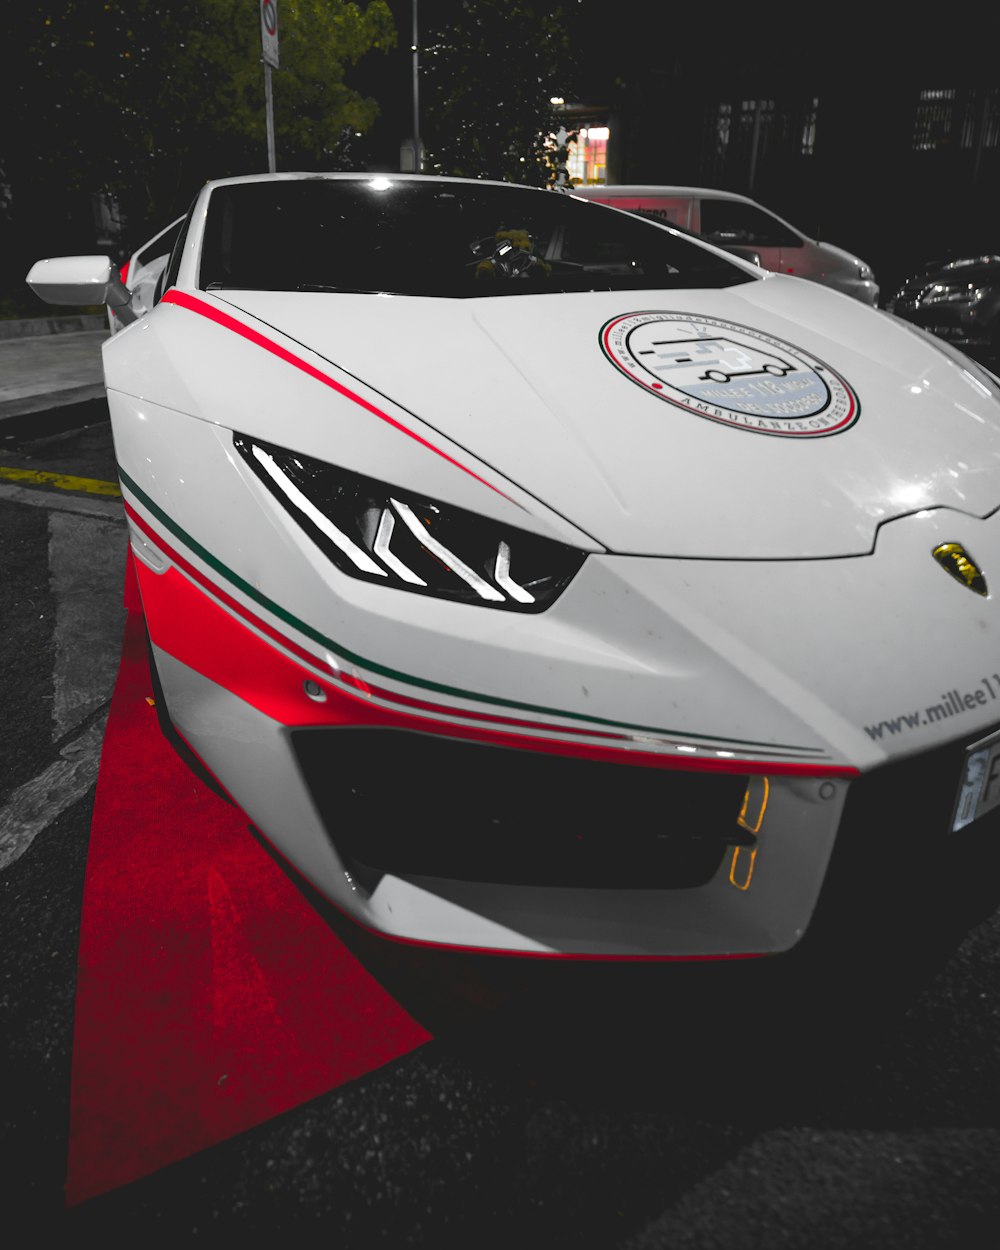 A parked white sports car.